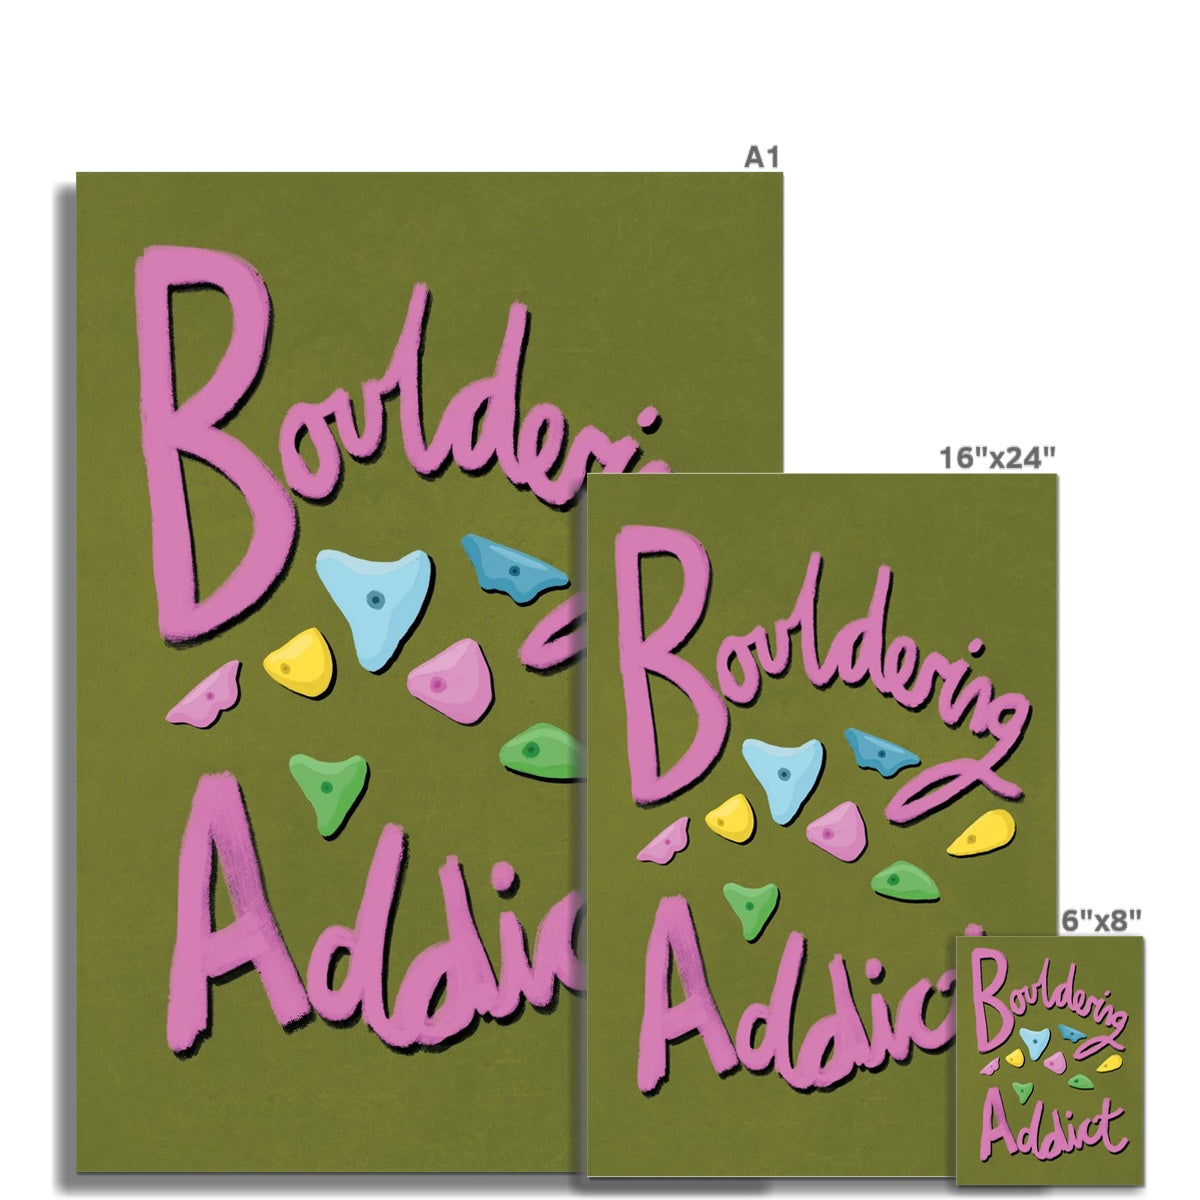 Bouldering Addict - Olive Green and Pink Fine Art Print